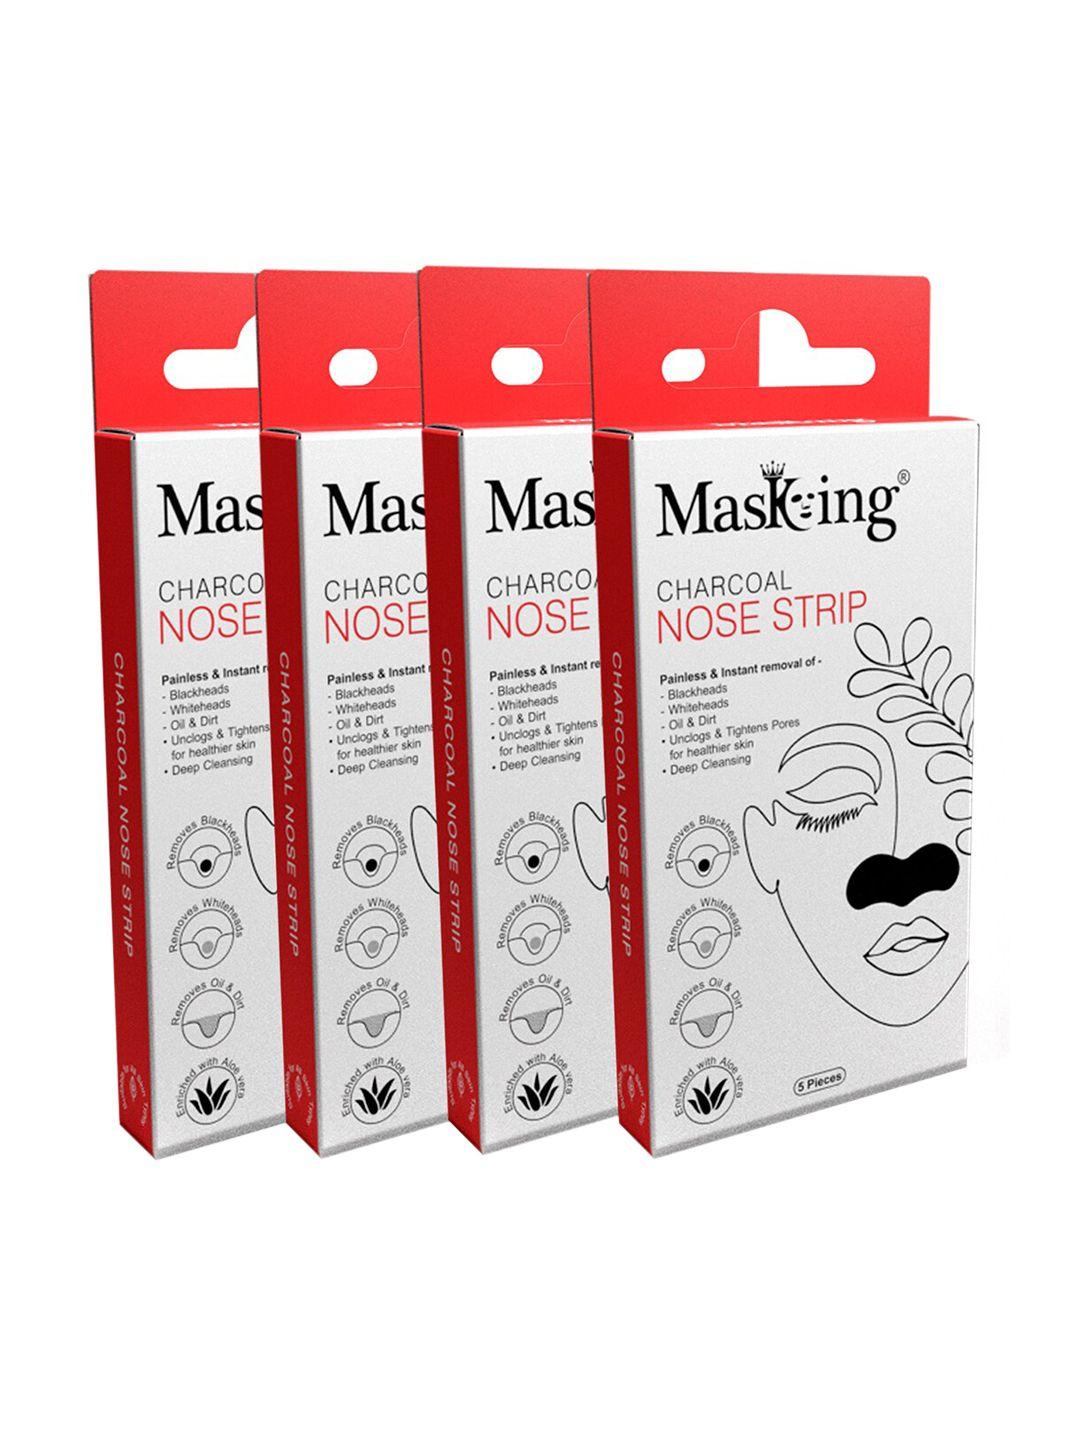 masking set of 4 charcoal nose stripes for blackheads removal - 5 pc per pack